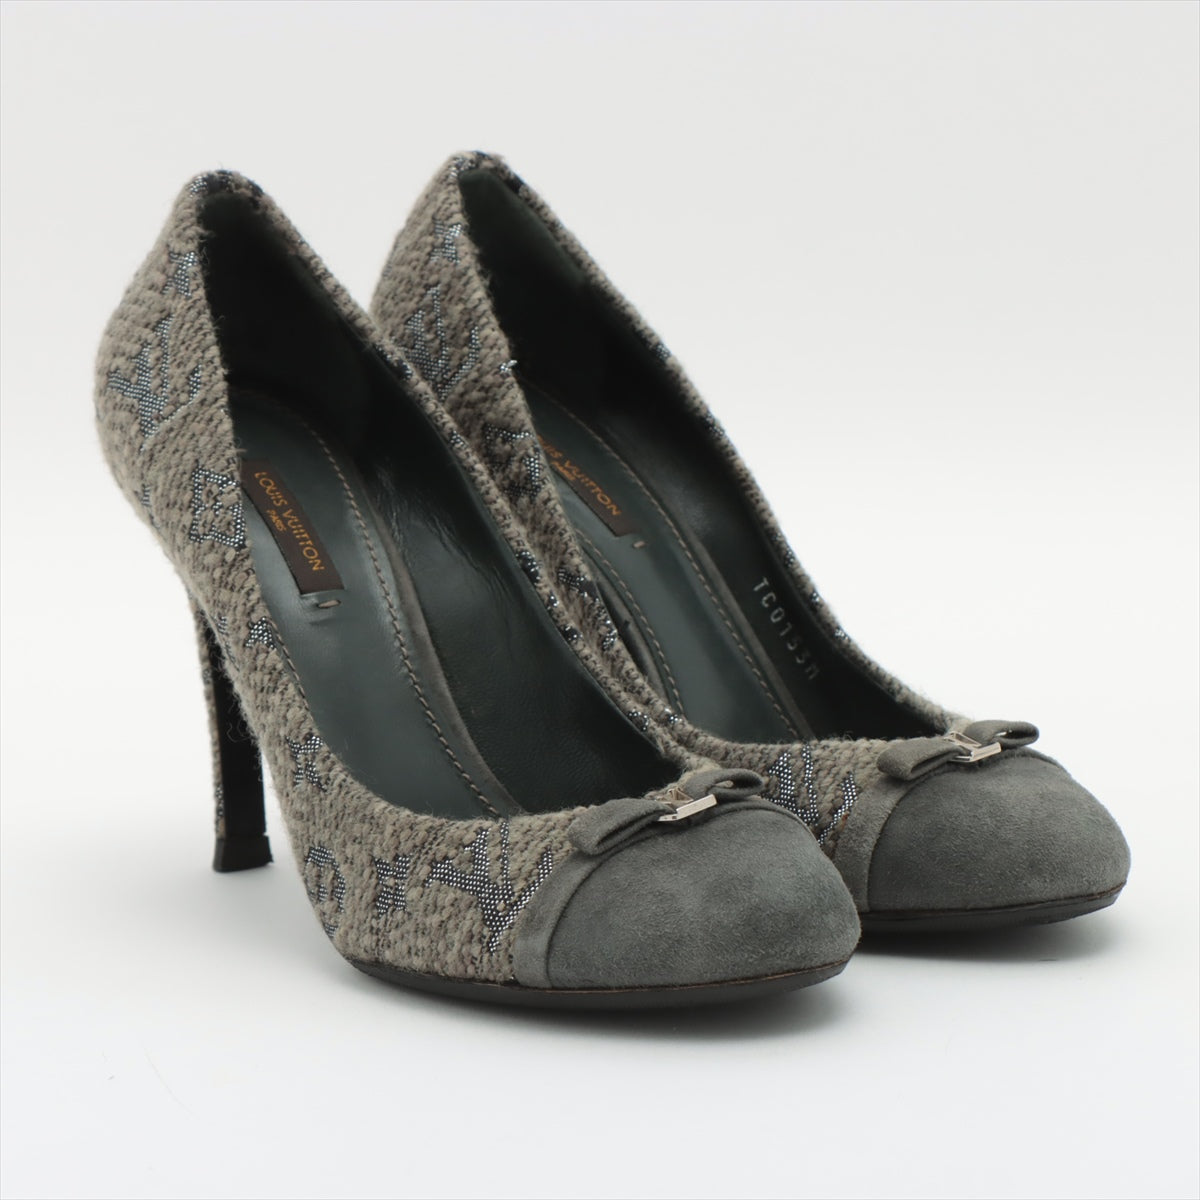 Louis Vuitton Tweed Pumps 38 1/2 Ladies' Grey TC0153 toes There are threads on insoles etc.